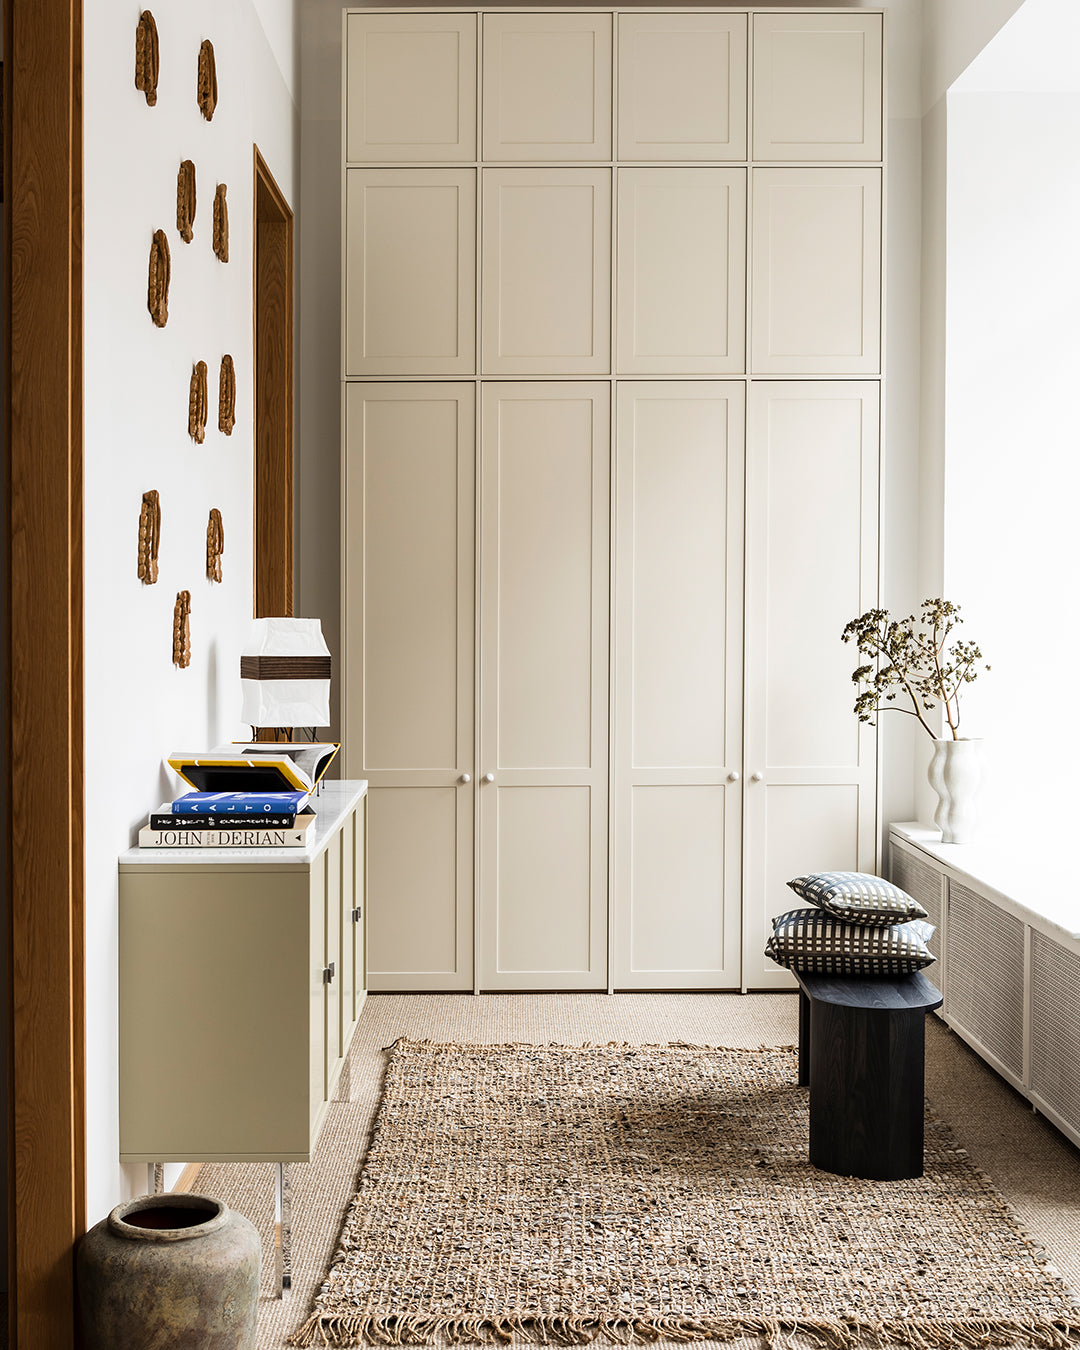 A.S.Helsingö Ensiö built-in wardrobe in linen brown colour with candy handles in spotty white